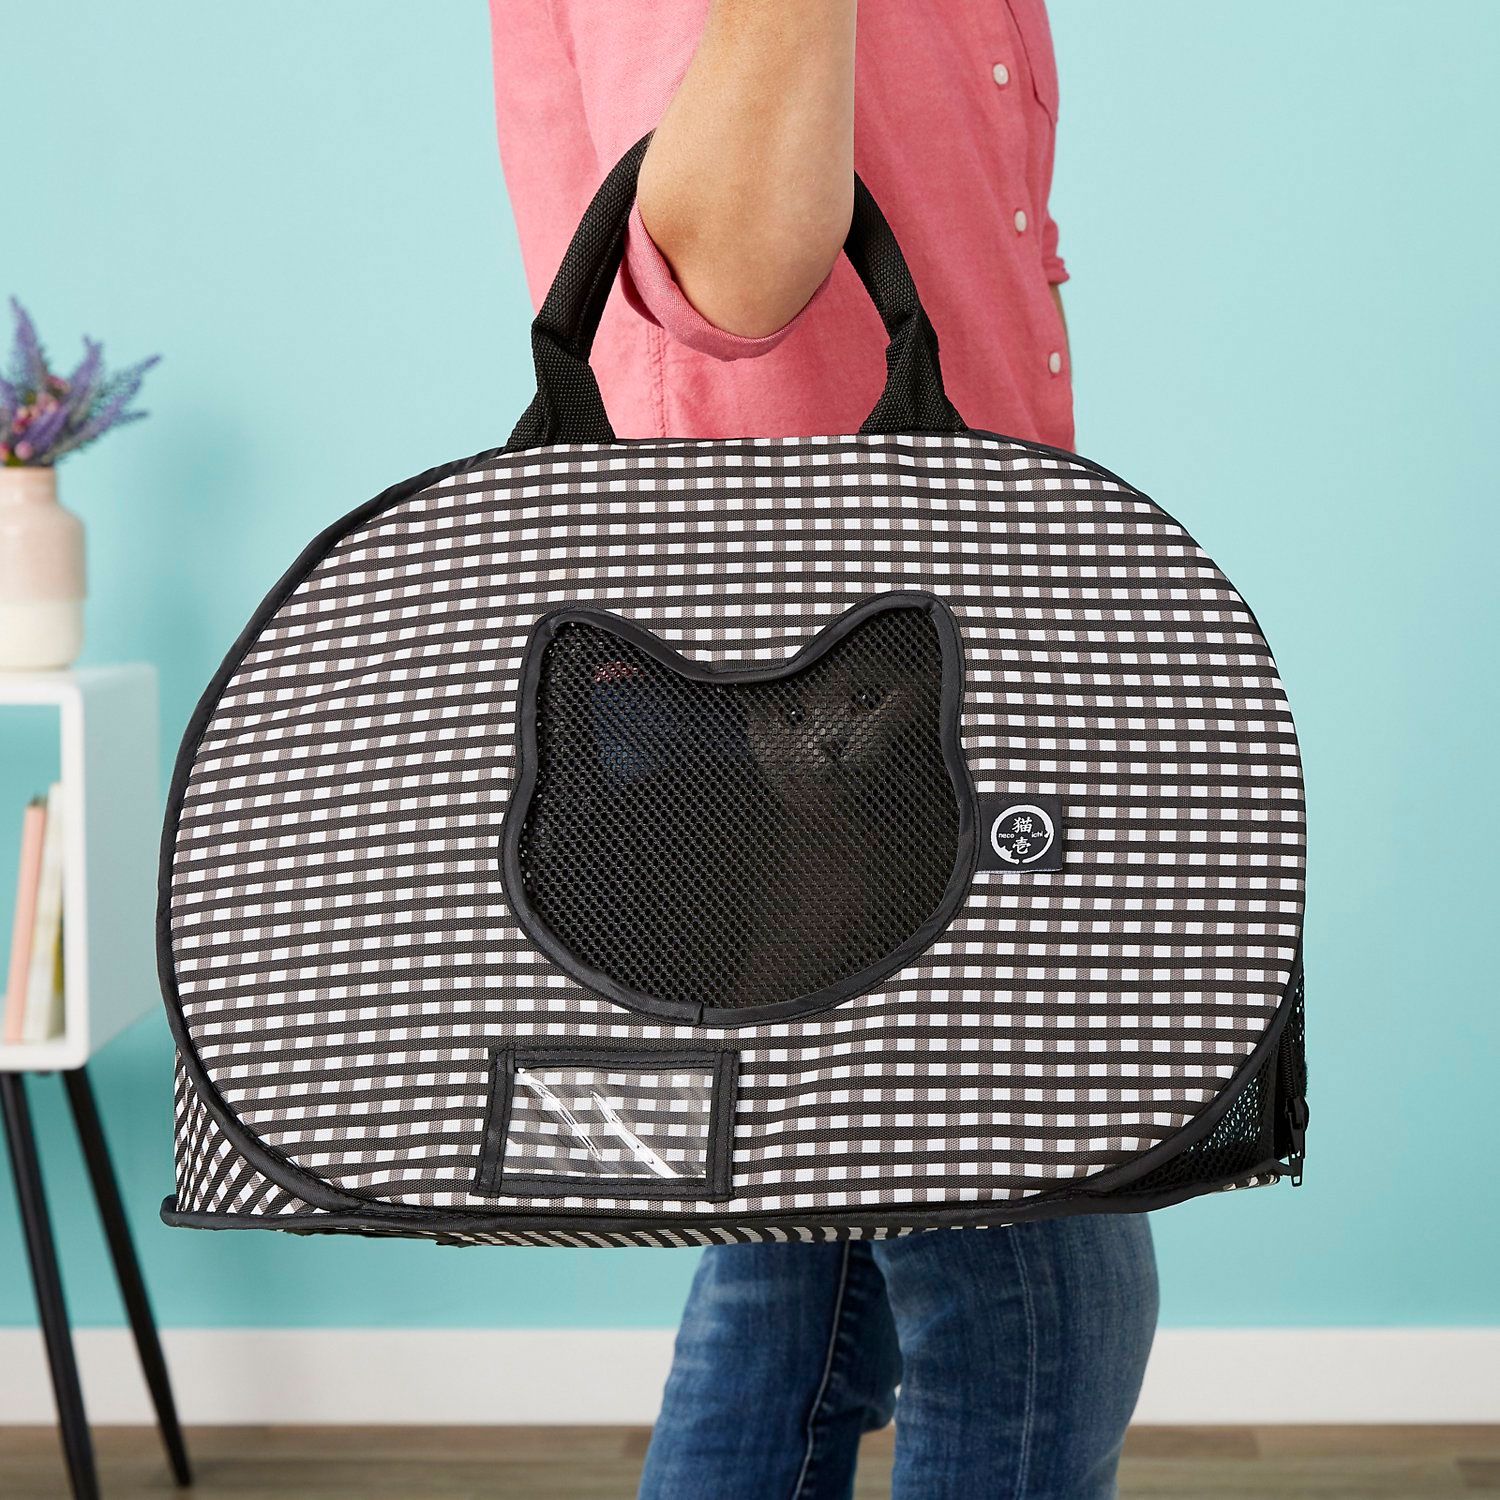 Collapsible Cat Carrier Bag.